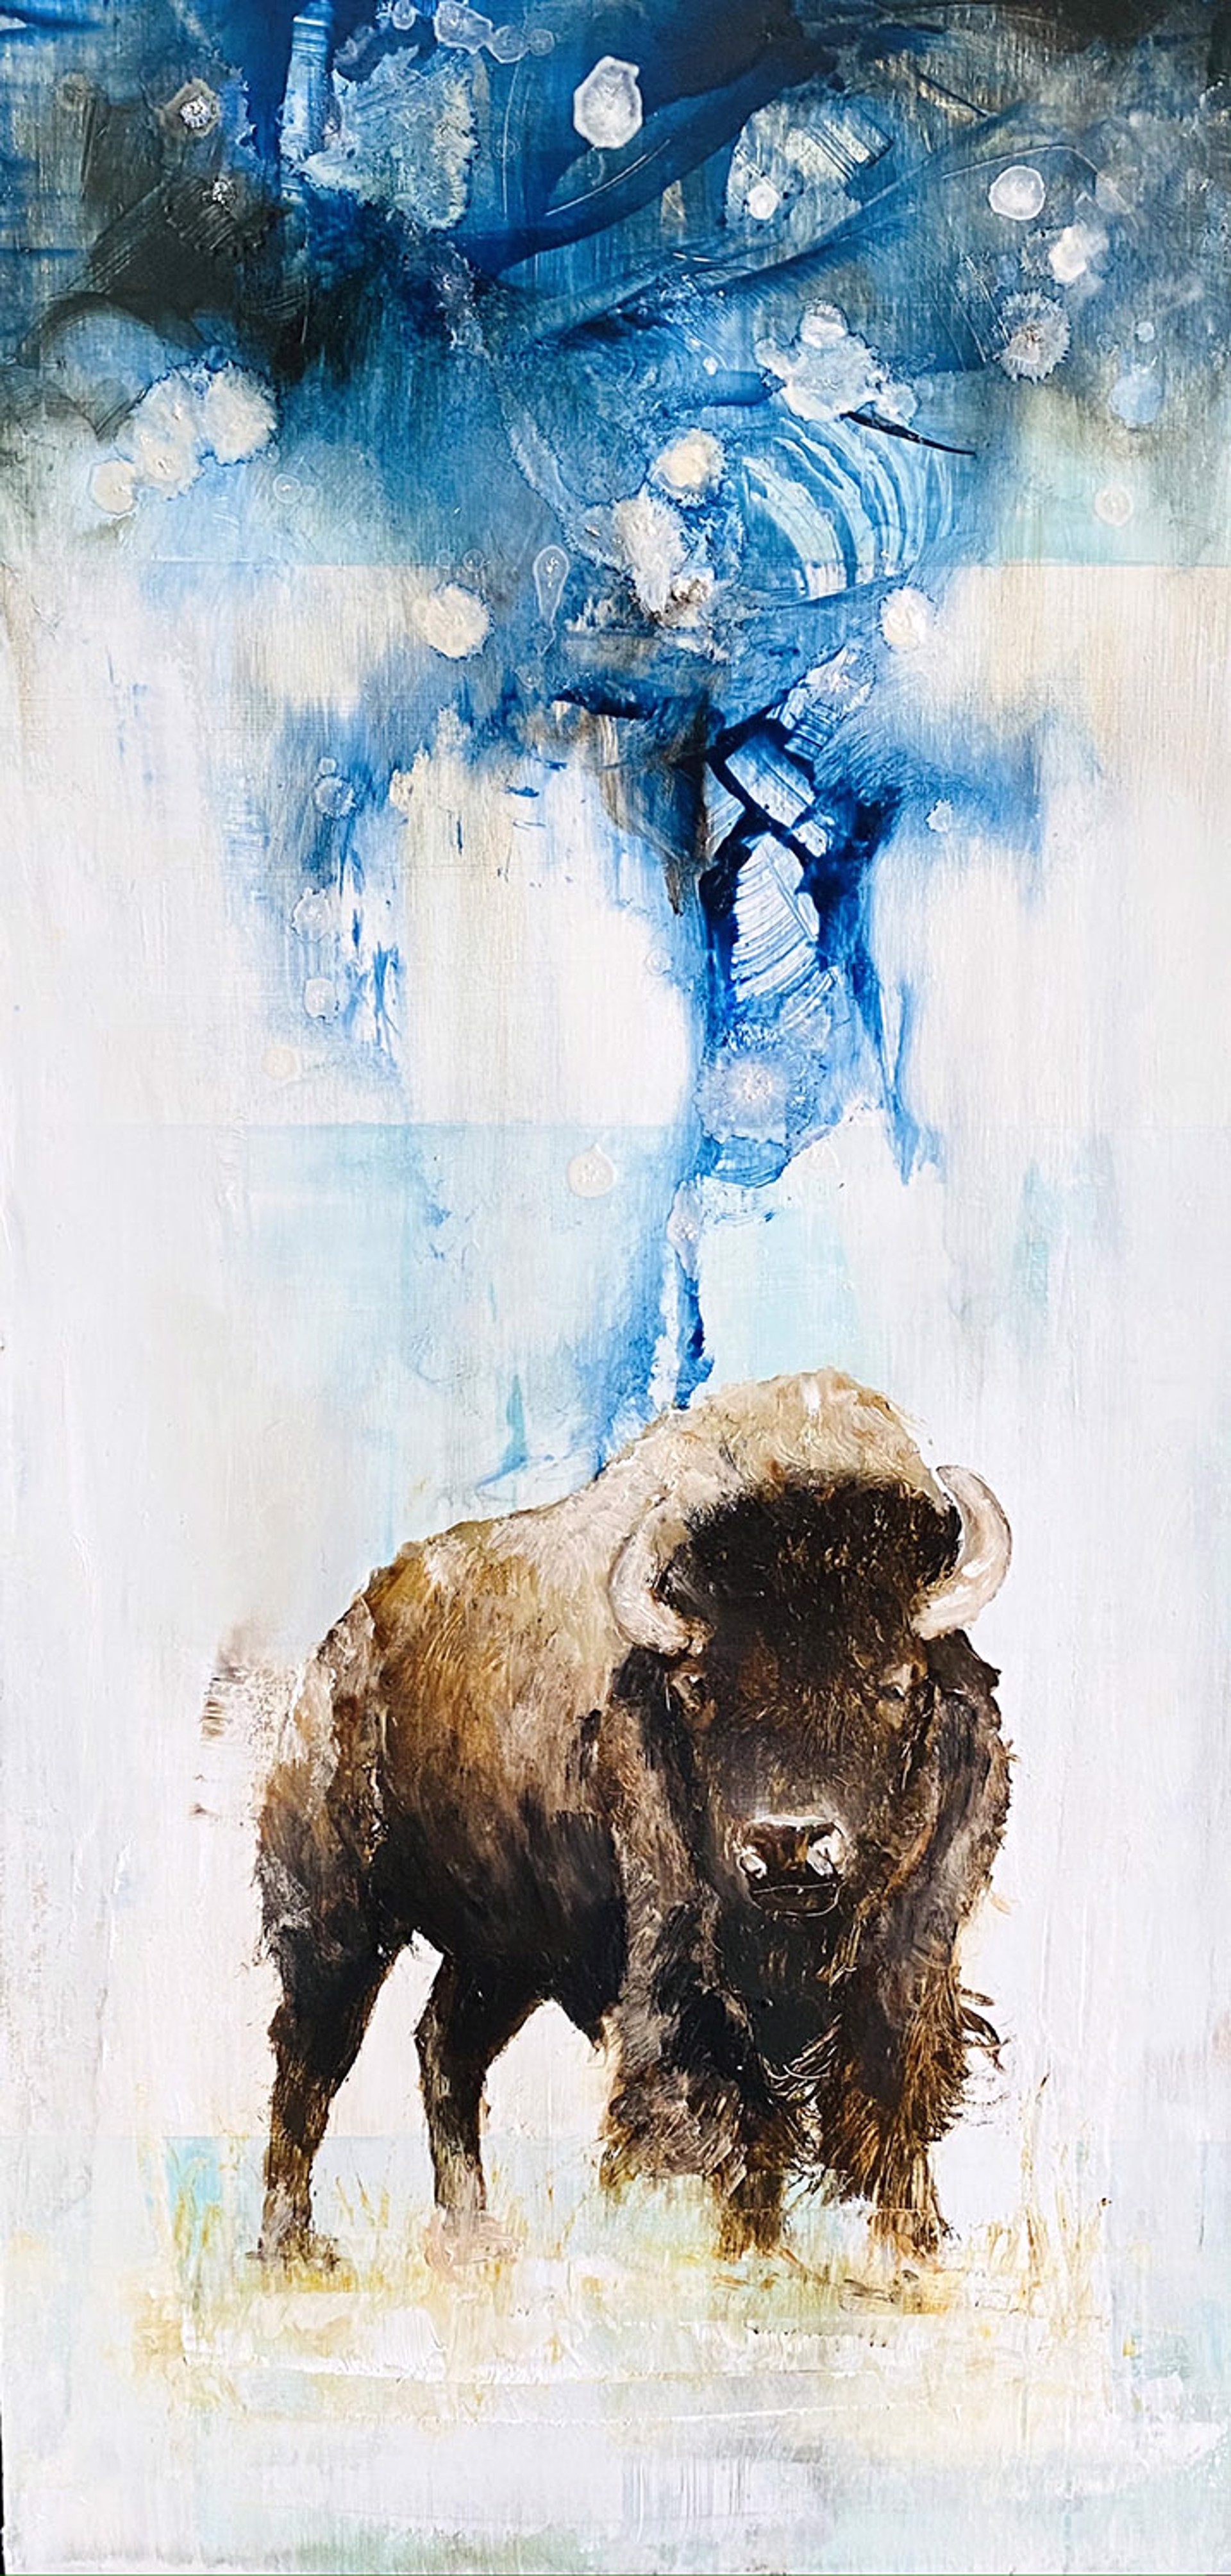 A Contemporary Painting Of A Standing Bison On A Blue And White Abstract Background By Jenna Von Benedikt At Gallery Wild